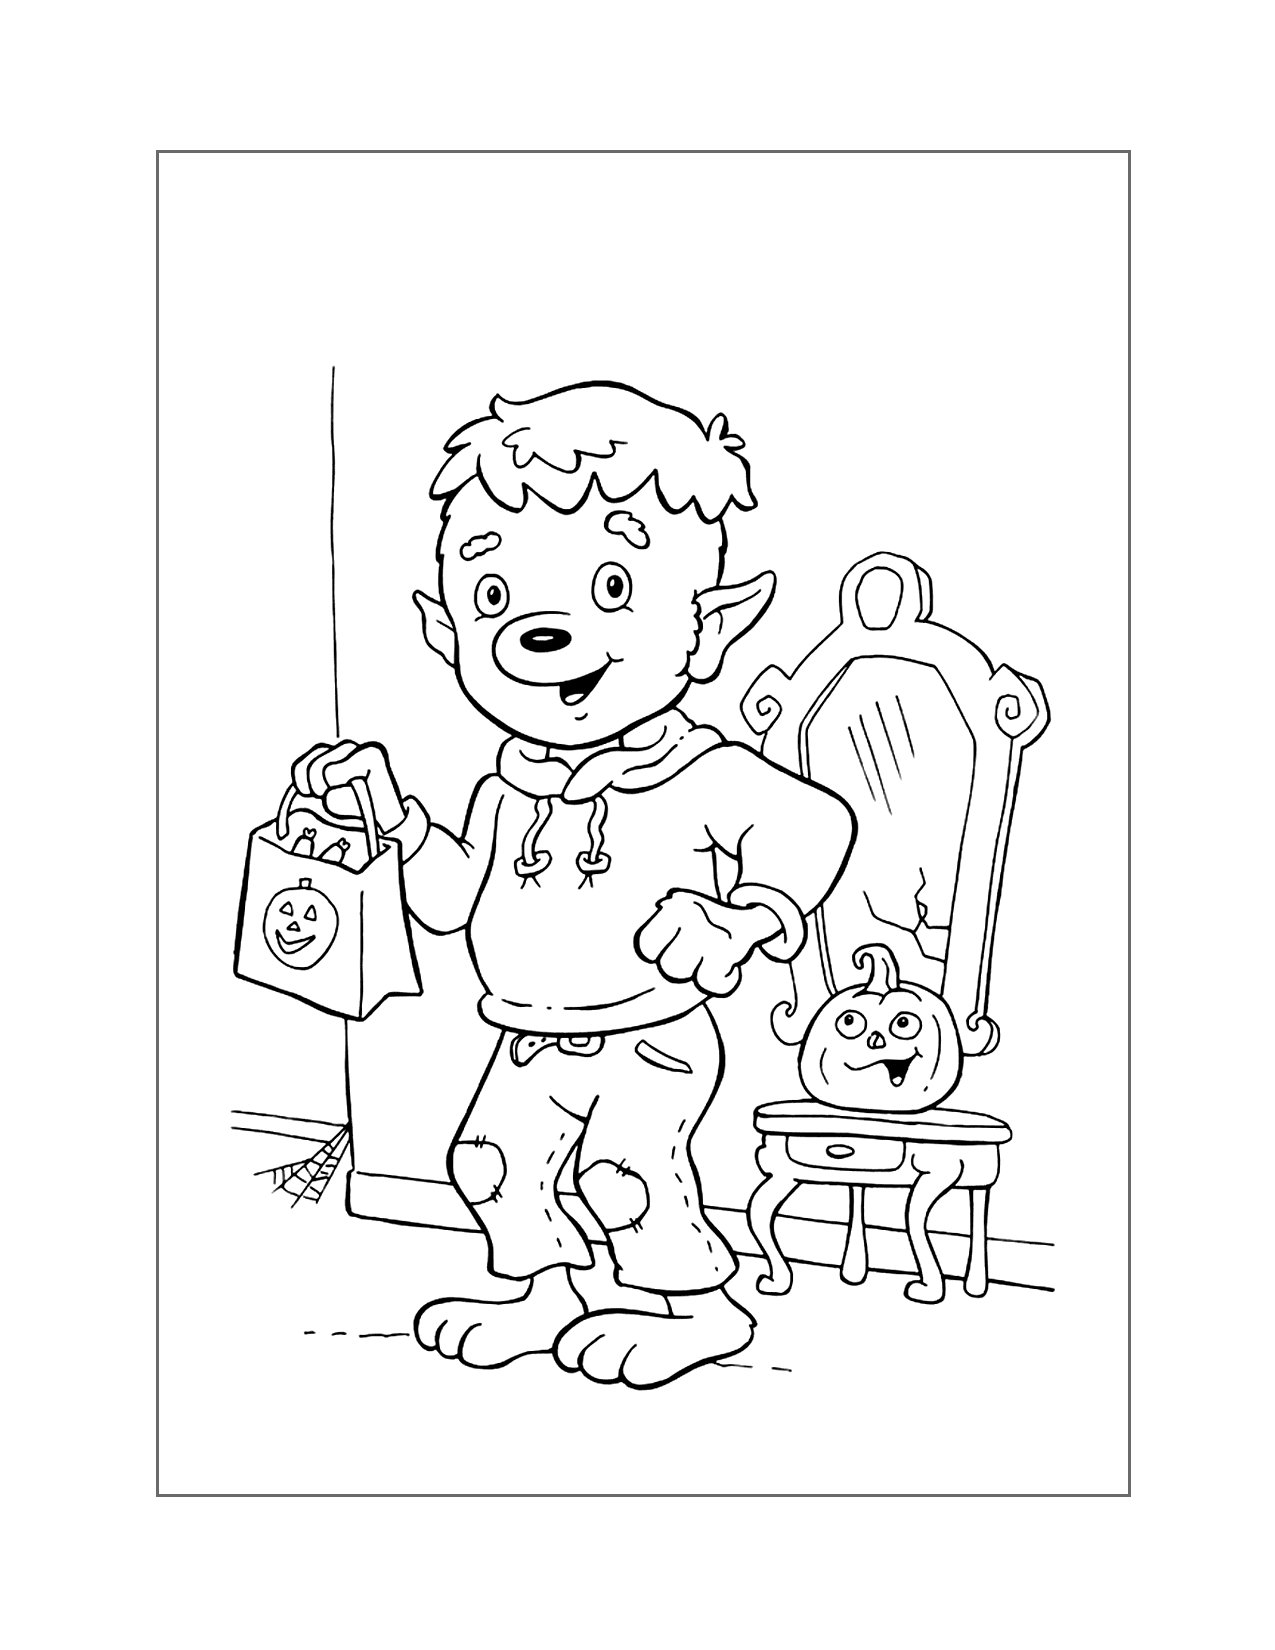 Young Werewolf Boy On Halloween Coloring Page